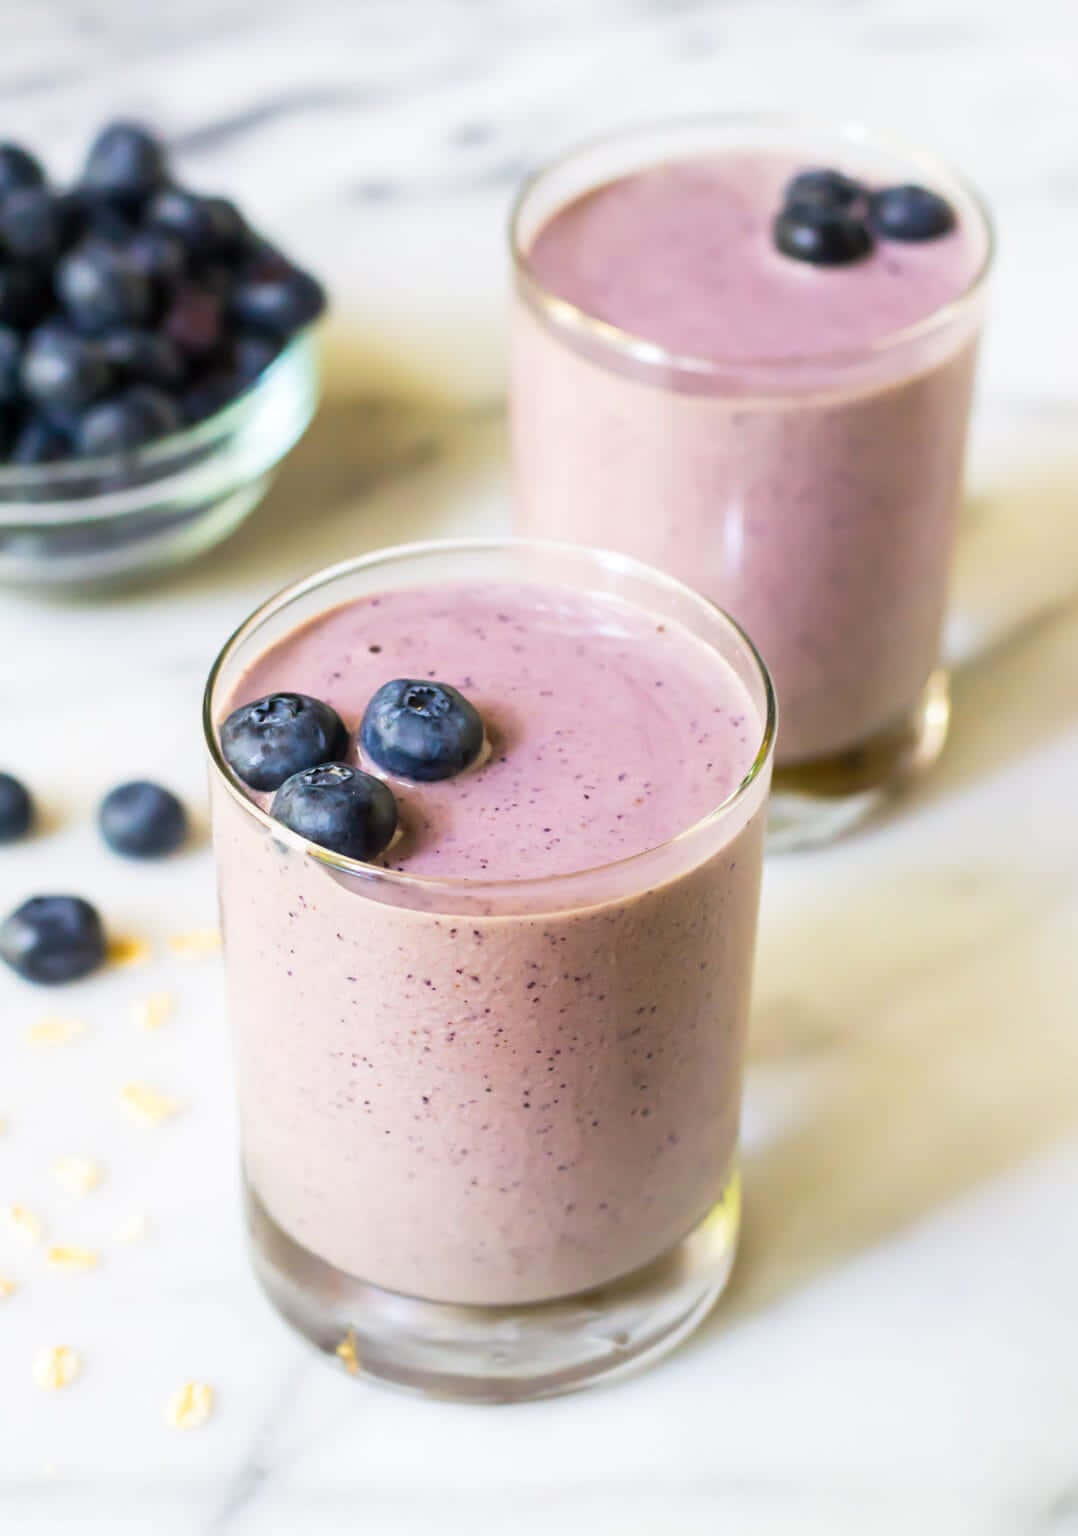 Treat yourself with a delicious Blueberry Smoothie and fill your body with vitamins and minerals! Wallpaper